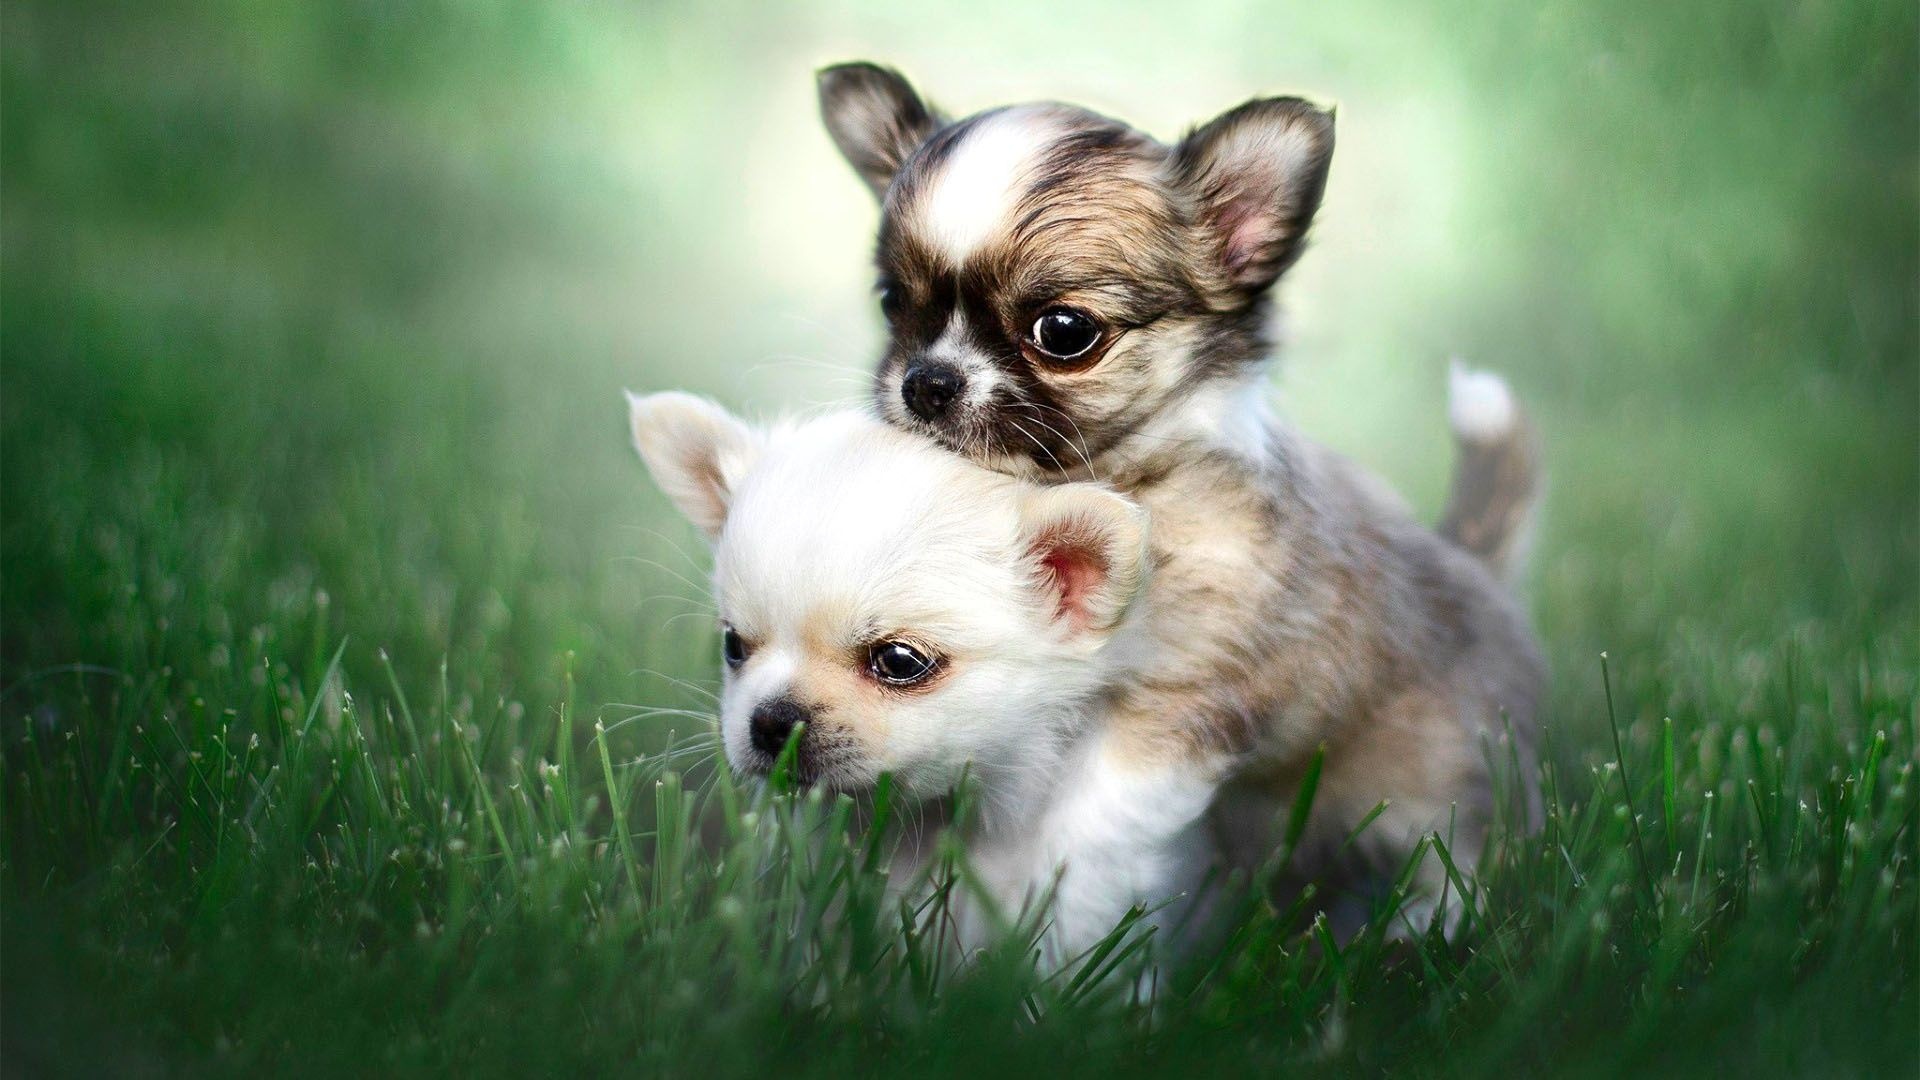 Chihuahua puppy wallpaper, Adorable and cute, Lovely pet, Heartwarming visuals, 1920x1080 Full HD Desktop